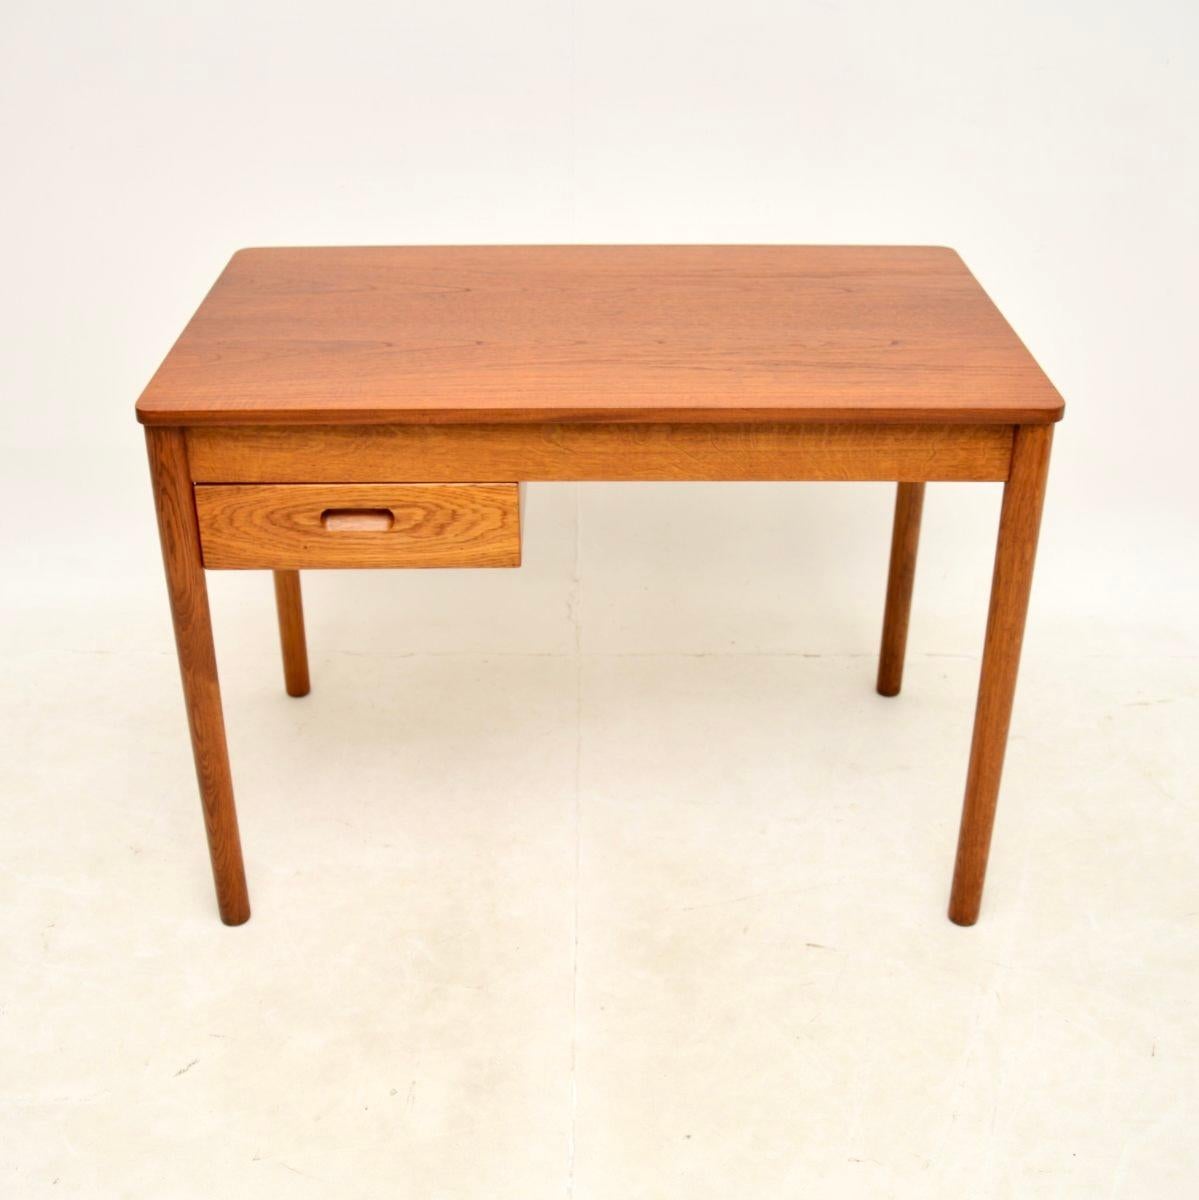 A smart and extremely well made Danish vintage teak and oak desk, dating from the 1960’s.

This is of superb quality and is a lovely, compact size. It is made almost completely of solid oak, with a beautiful teak top. There is a single deep drawer